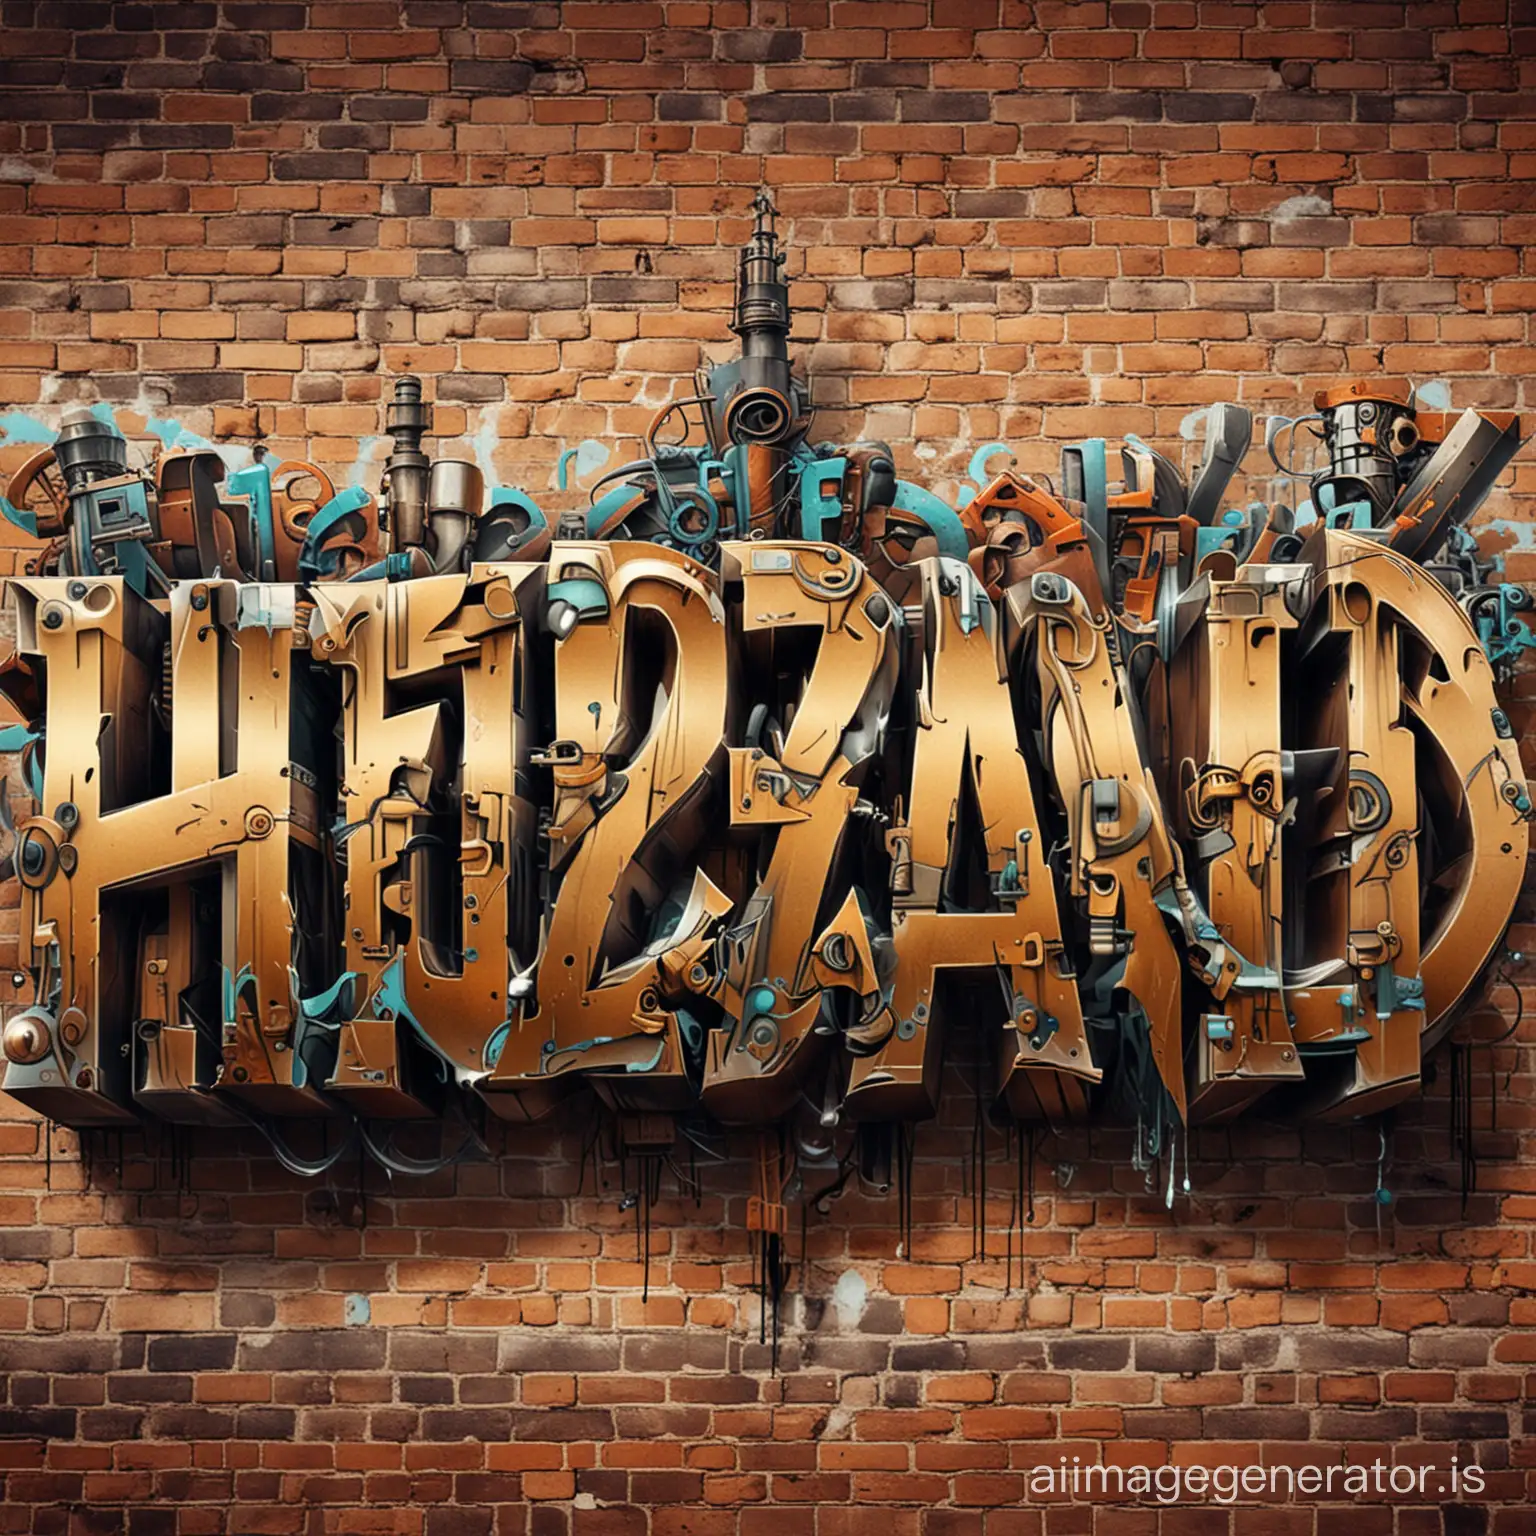 The Name HuzzBand in steampunk graffiti style letters